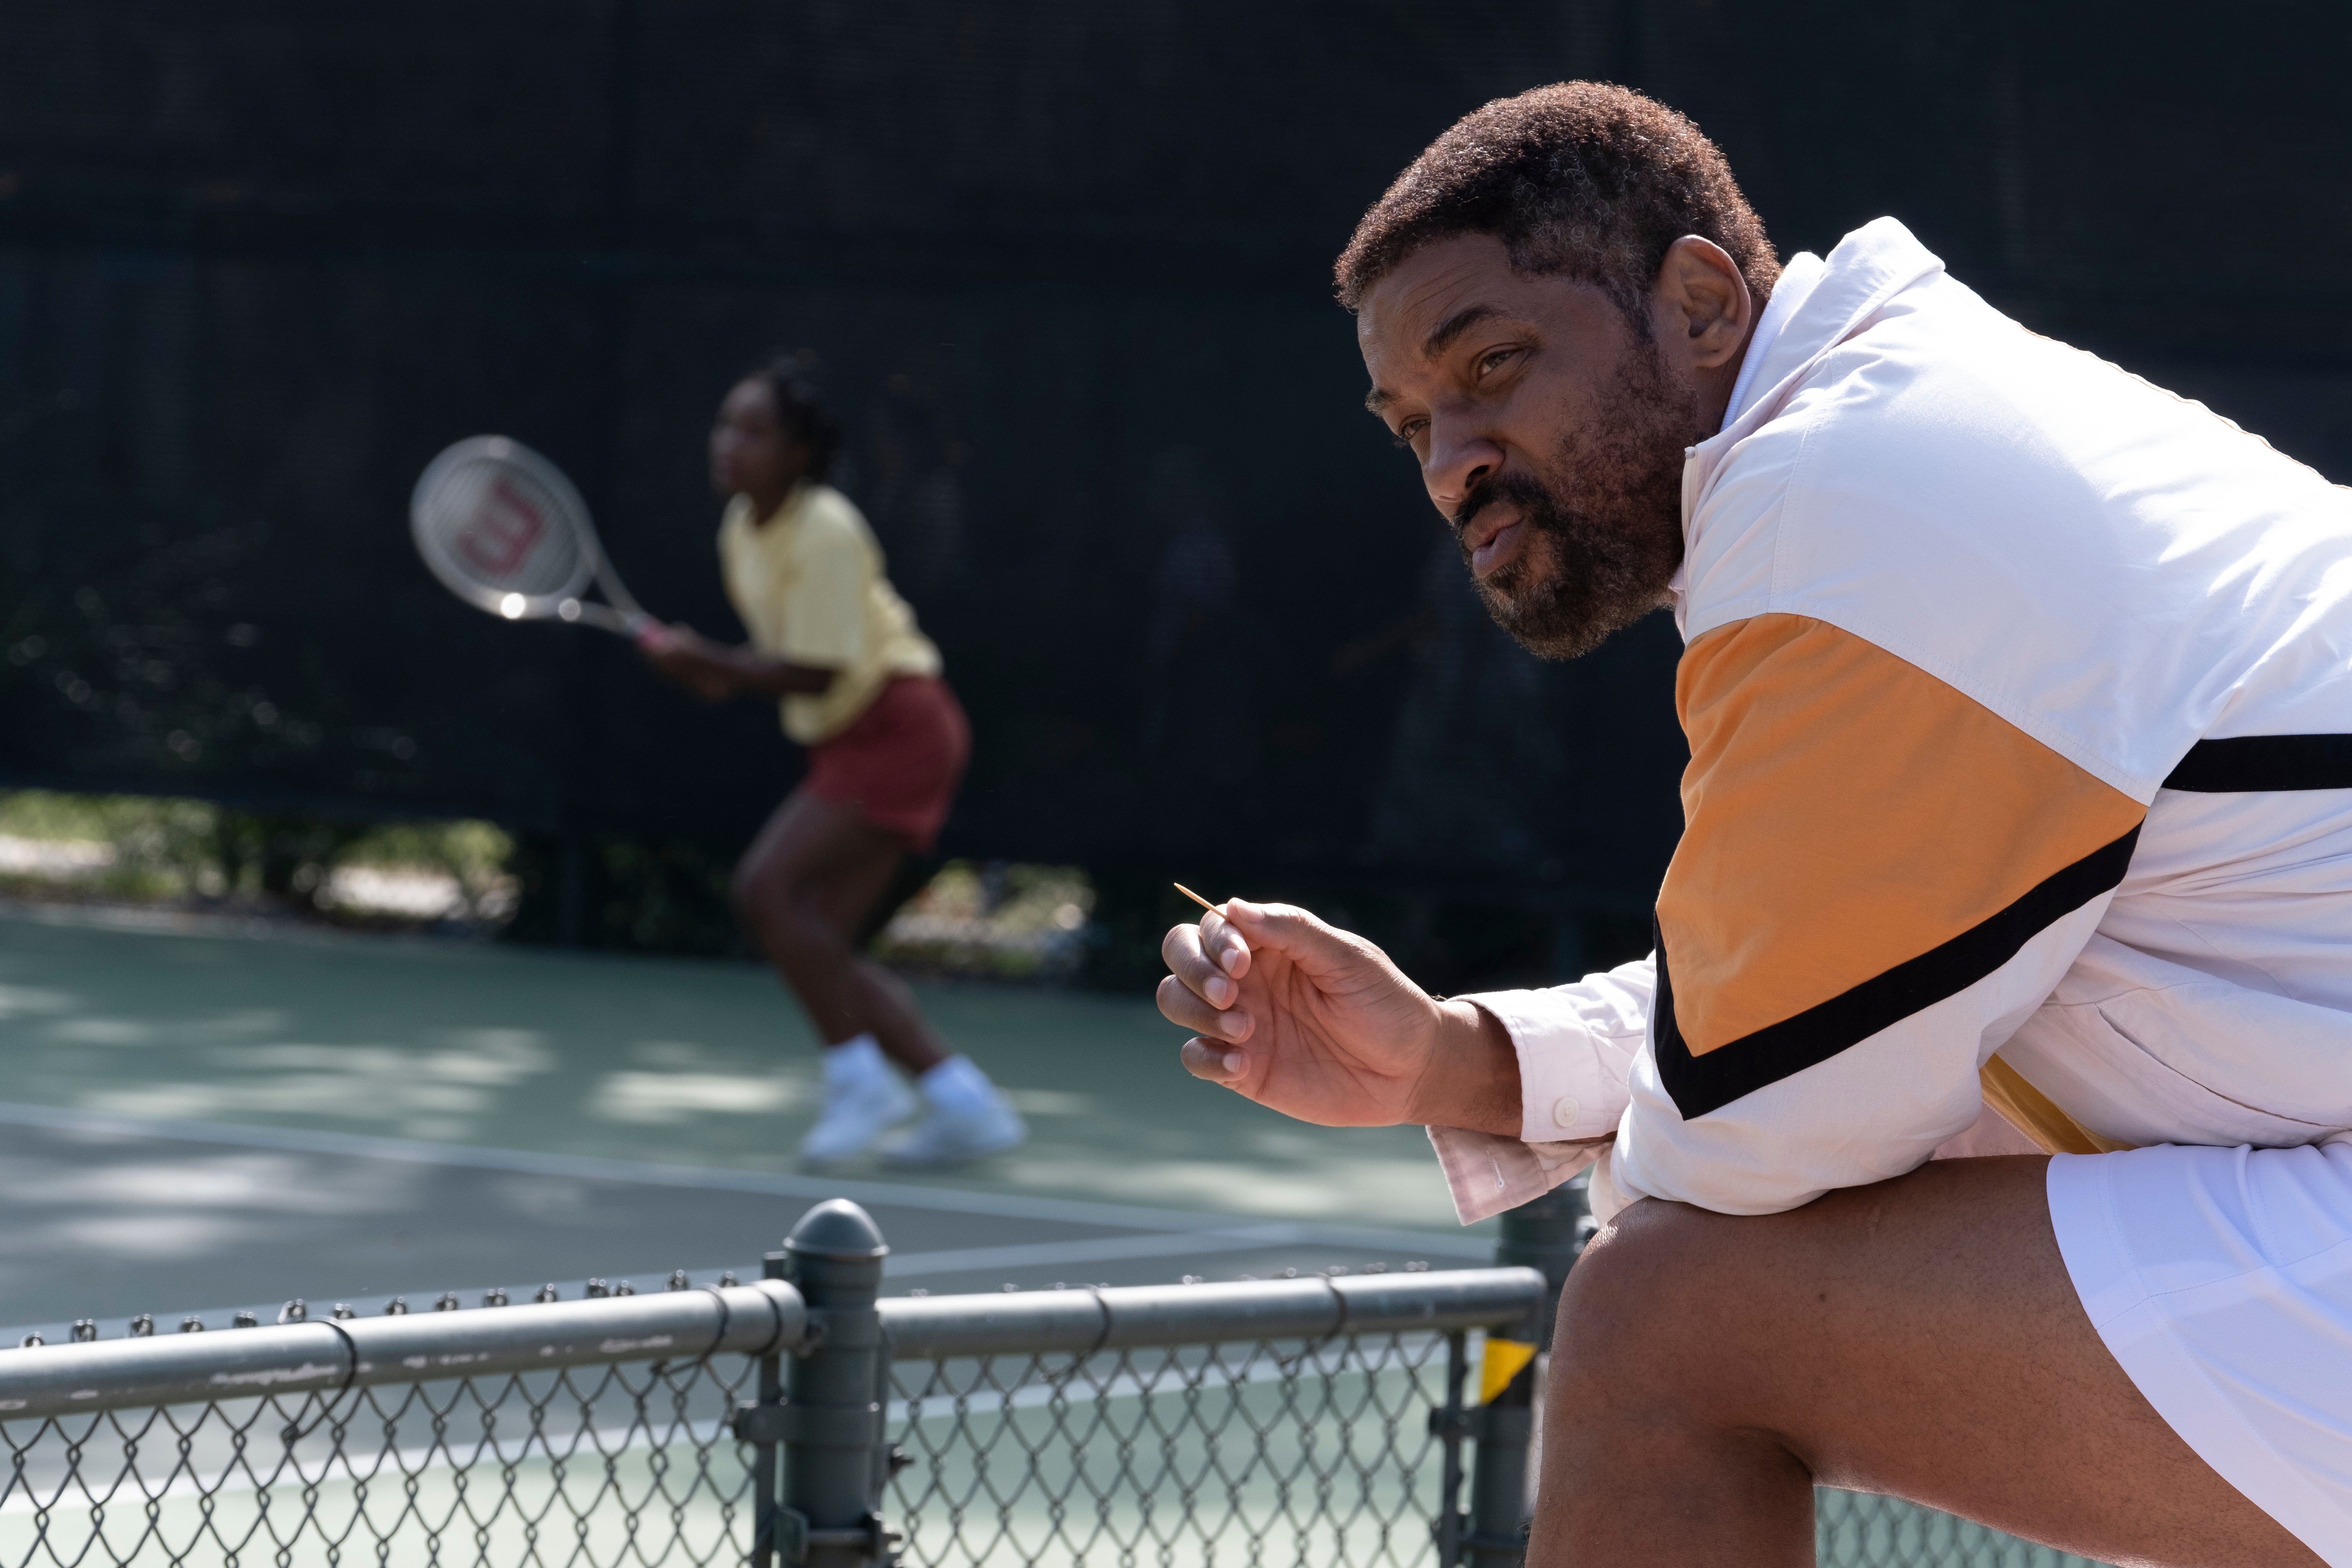 Will Smith in ‘King Richard’ (2021) about Venus and Serena Williams